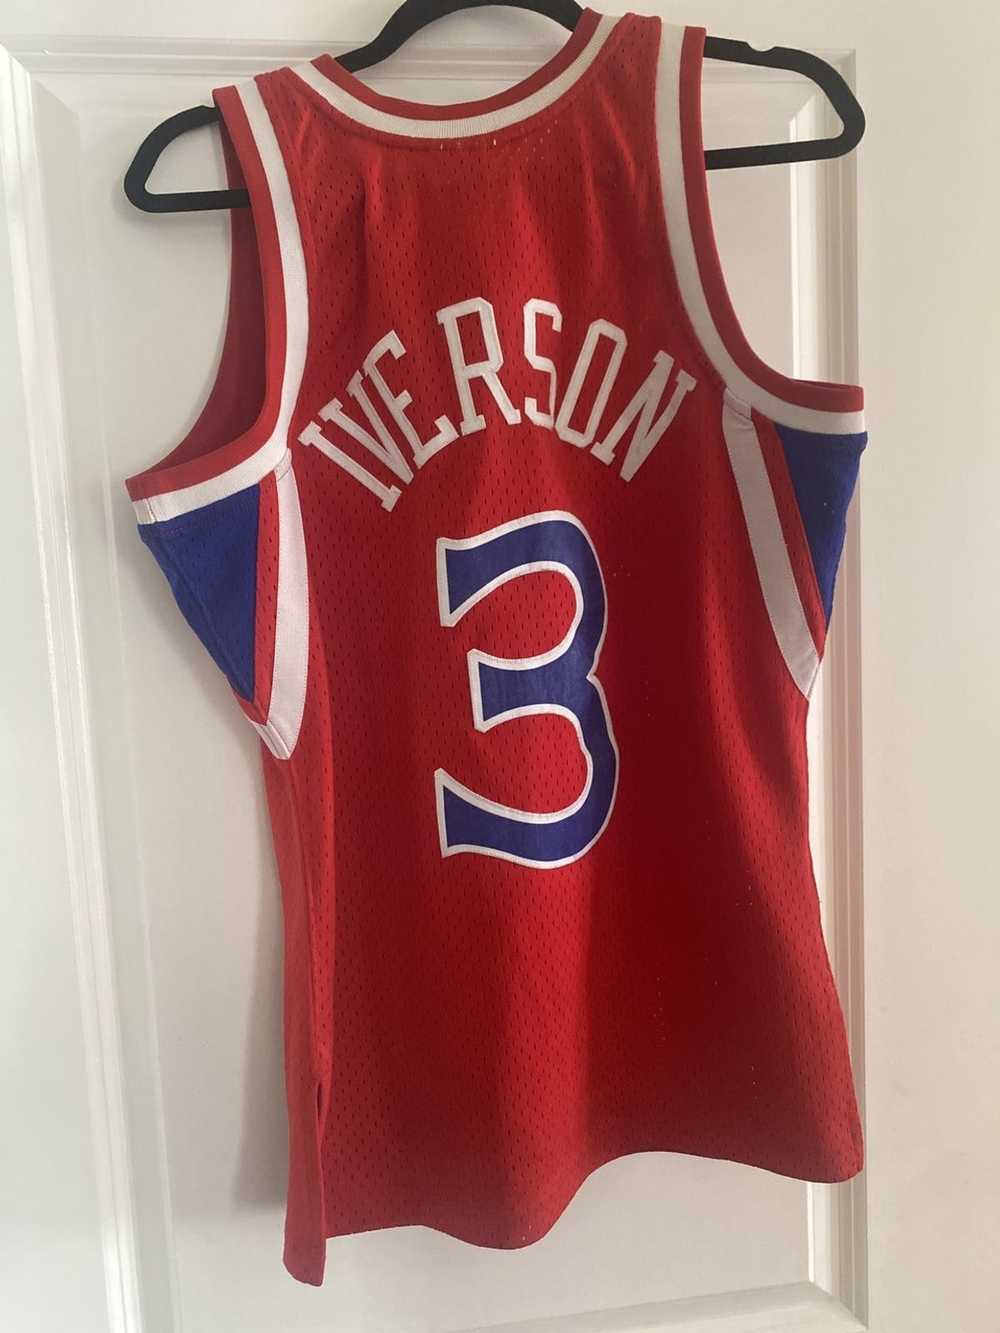 Mitchell & Ness Rookie Allen Iverson Sixers Jersey - image 2